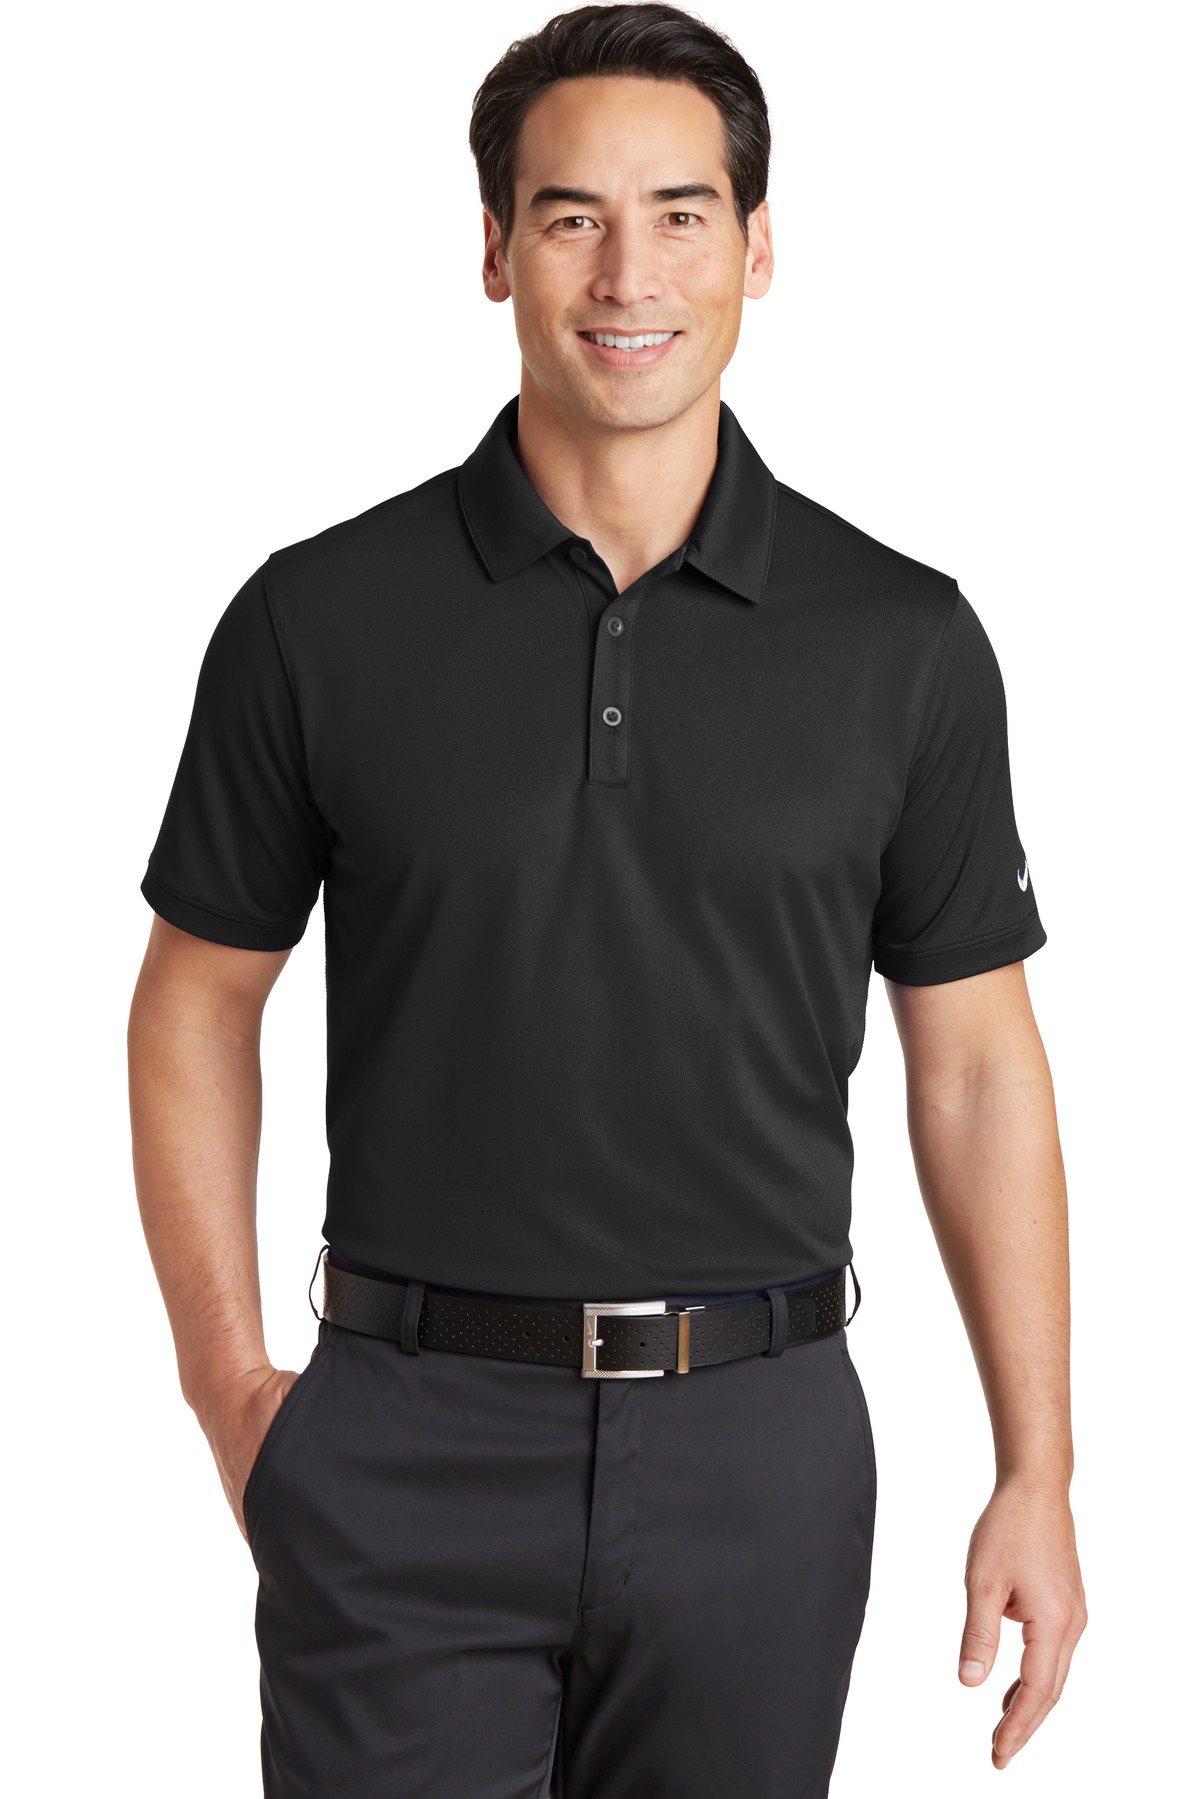 Nike Dri-FIT Solid Icon Pique Modern Fit Polo-Nike